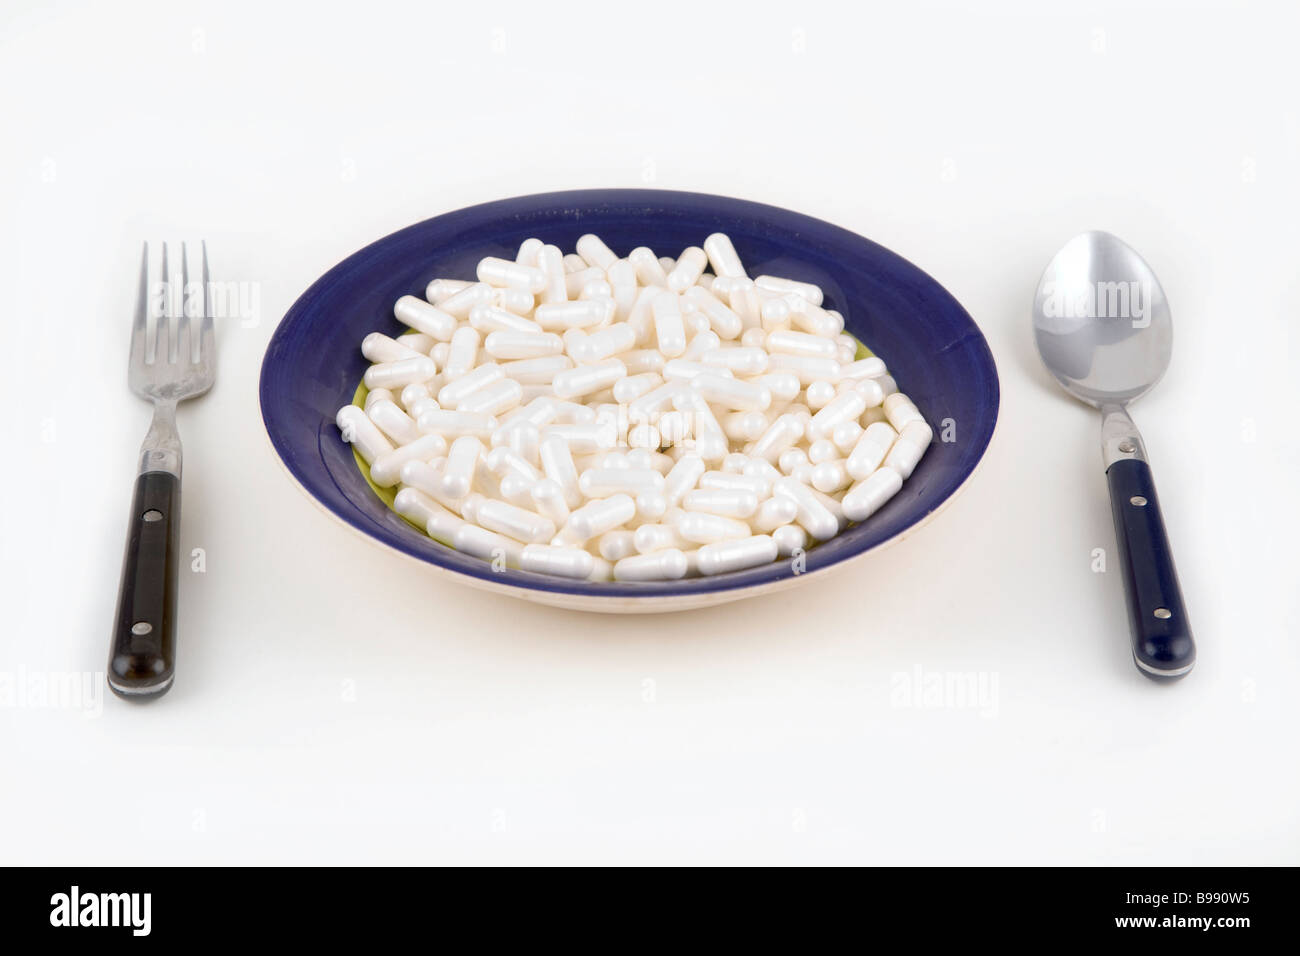 A bowl of pills with a knife and spoon on a white background Stock Photo